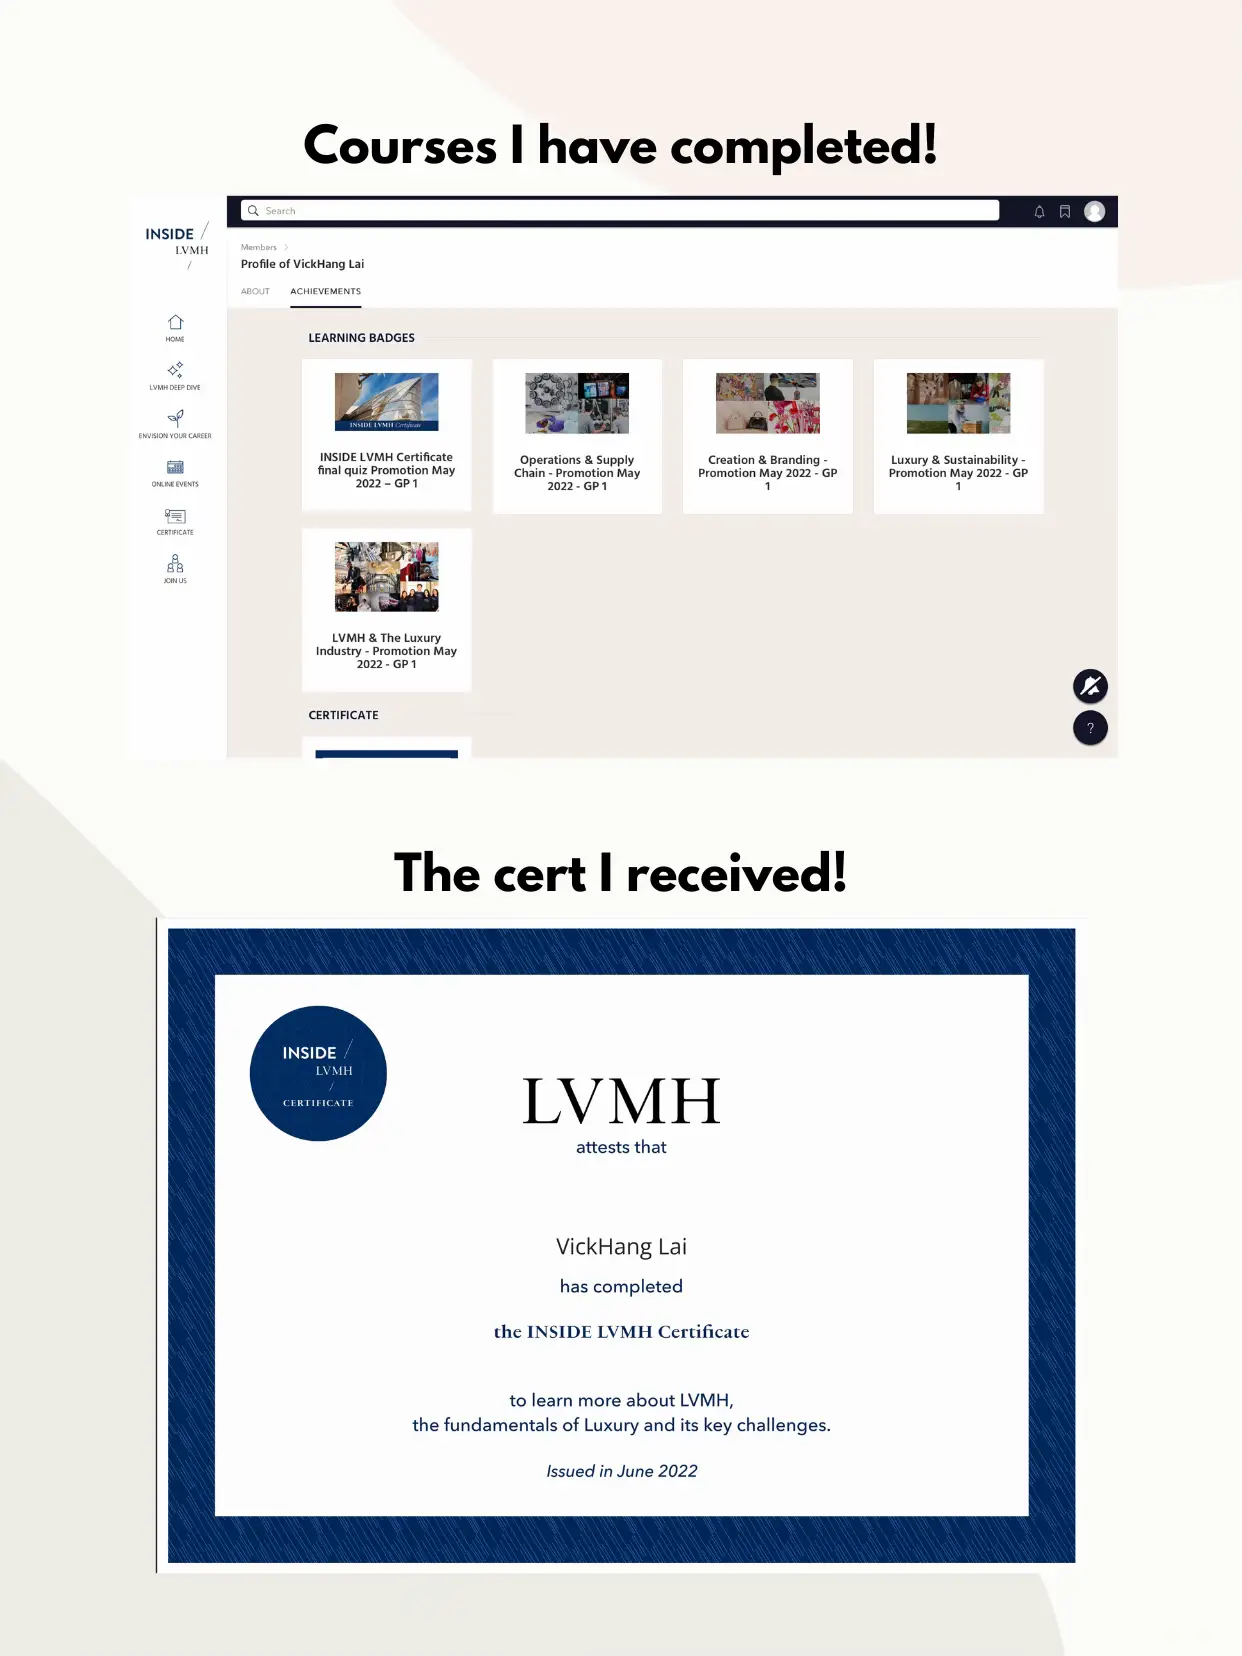 Good Product Onlineselfdev DID YOU KNOW? Free Certificate by LVMH